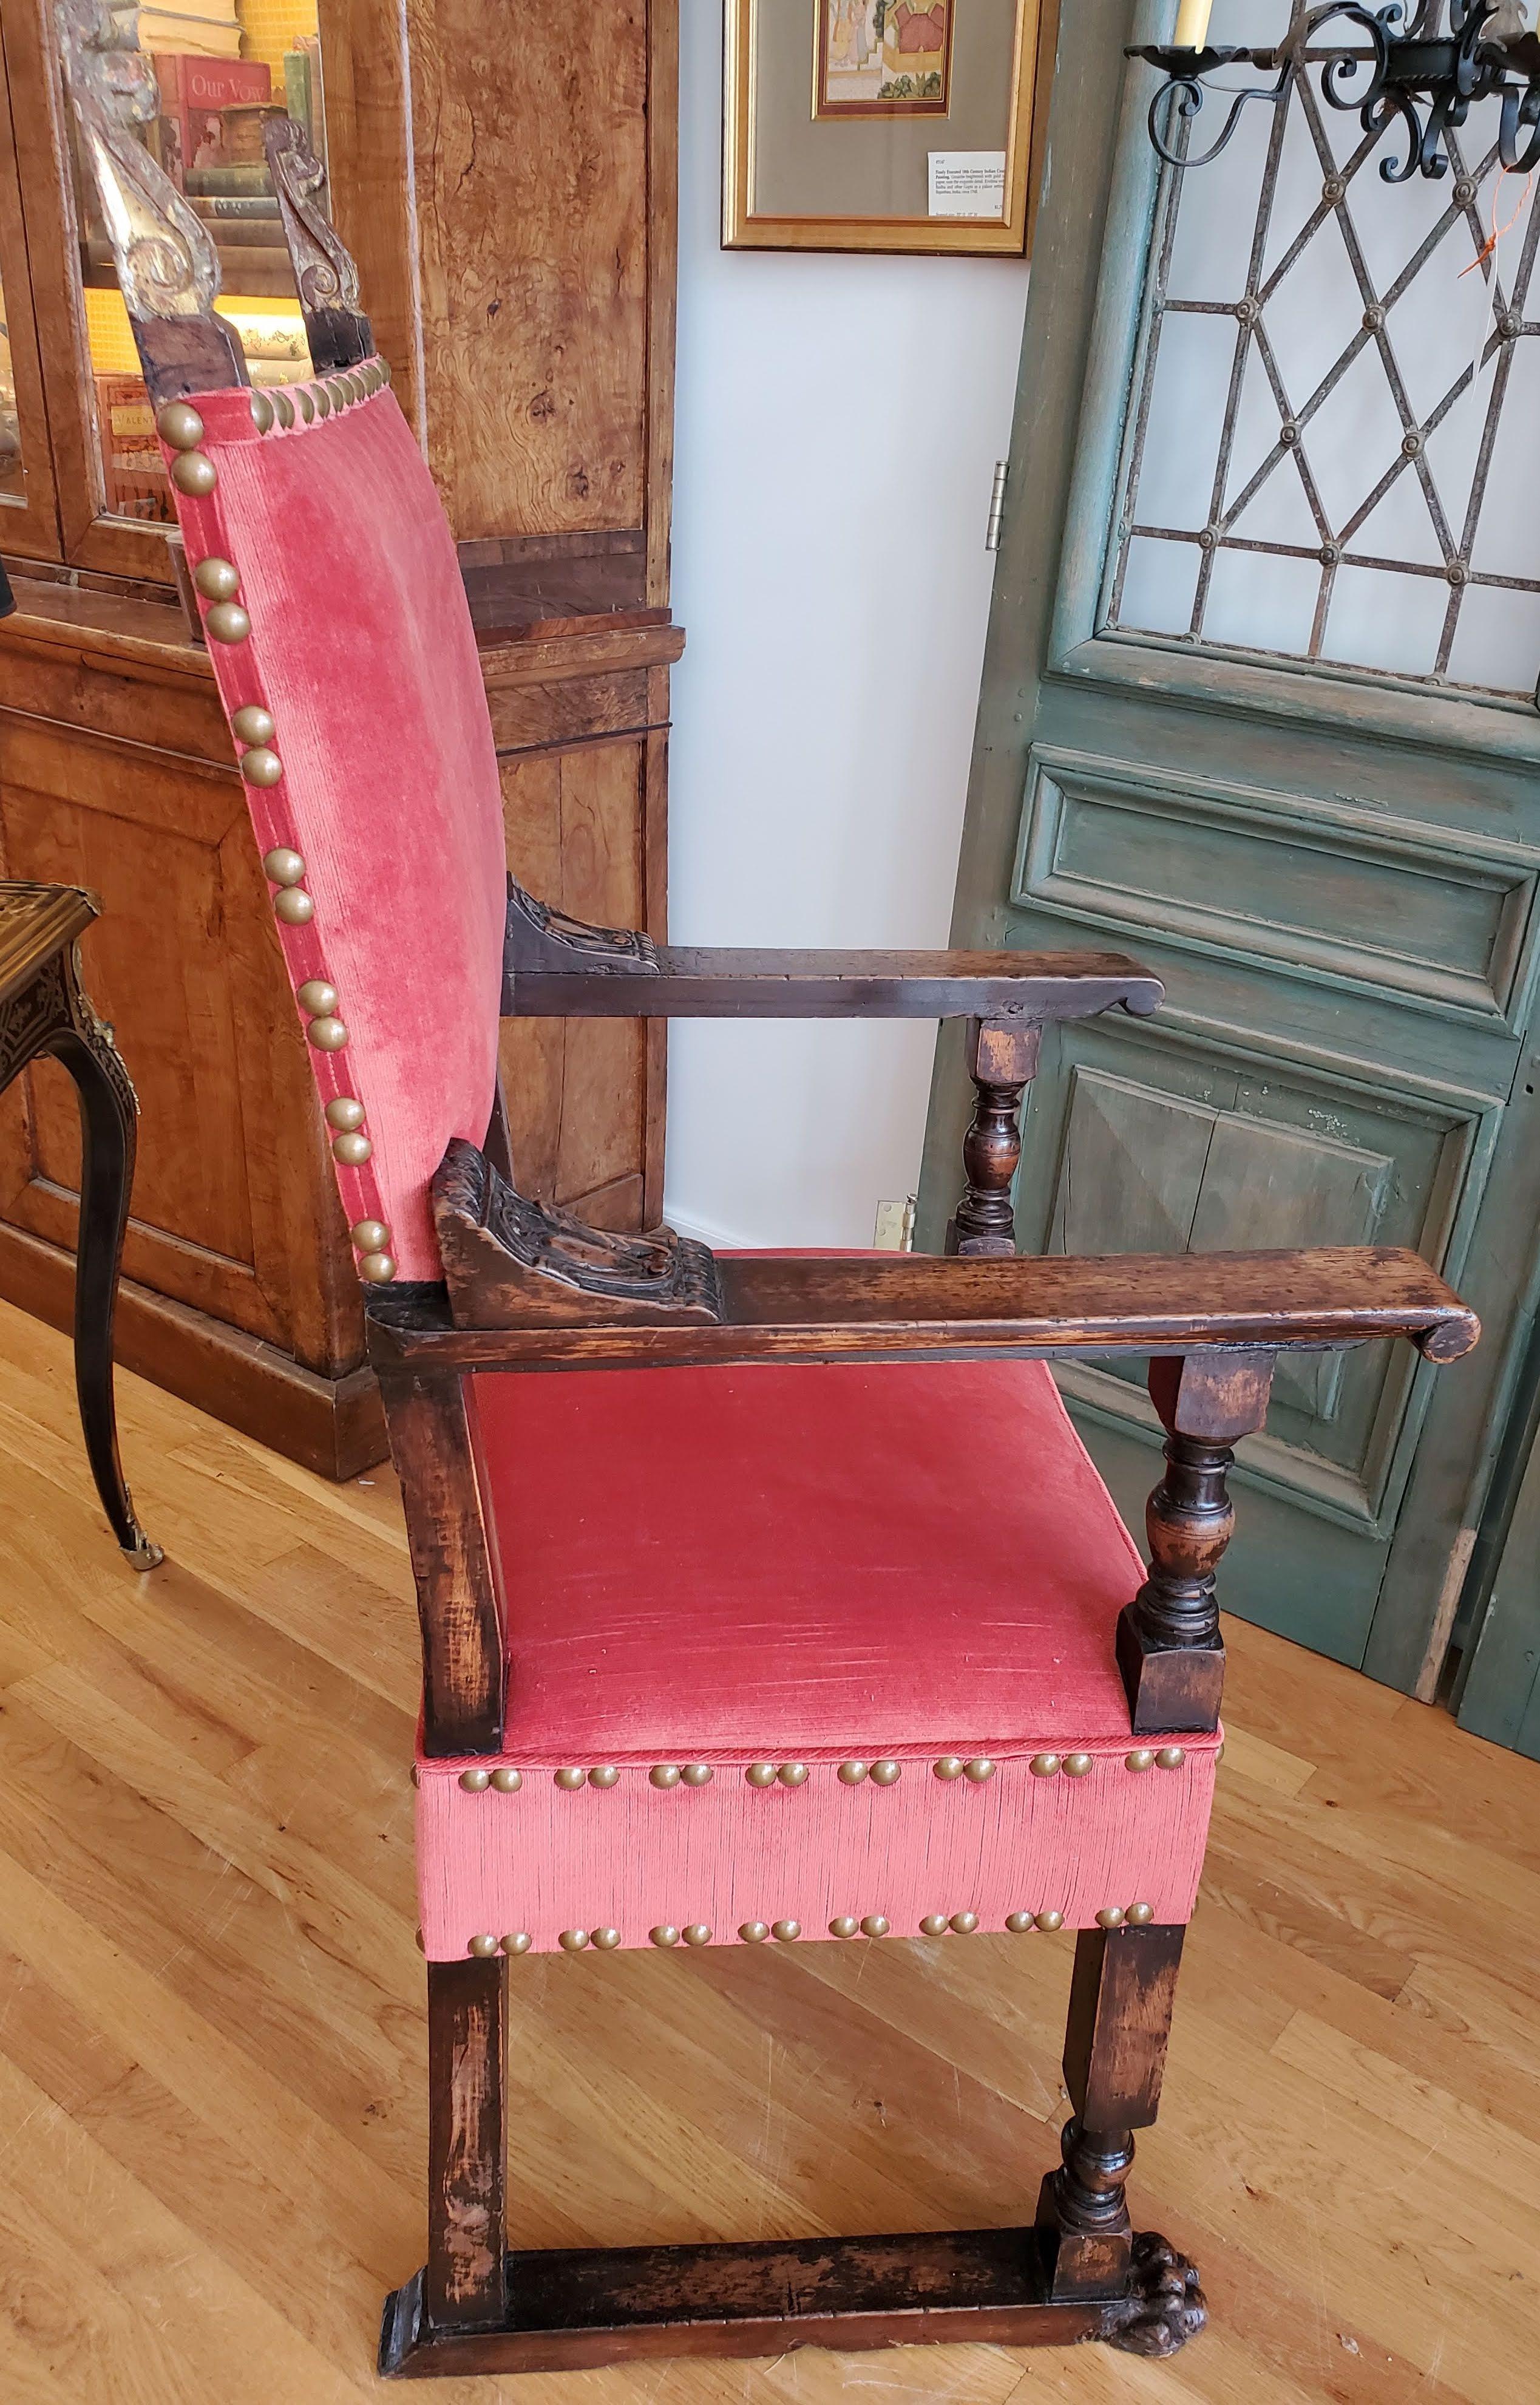 This is an extremely rare 16th century Italian armchair from the late Italian Renaissance period. Made of Circassian walnut with a deep patination and rich deep color. Decorative posts with carved acanthus leaves retaining the original gilding over